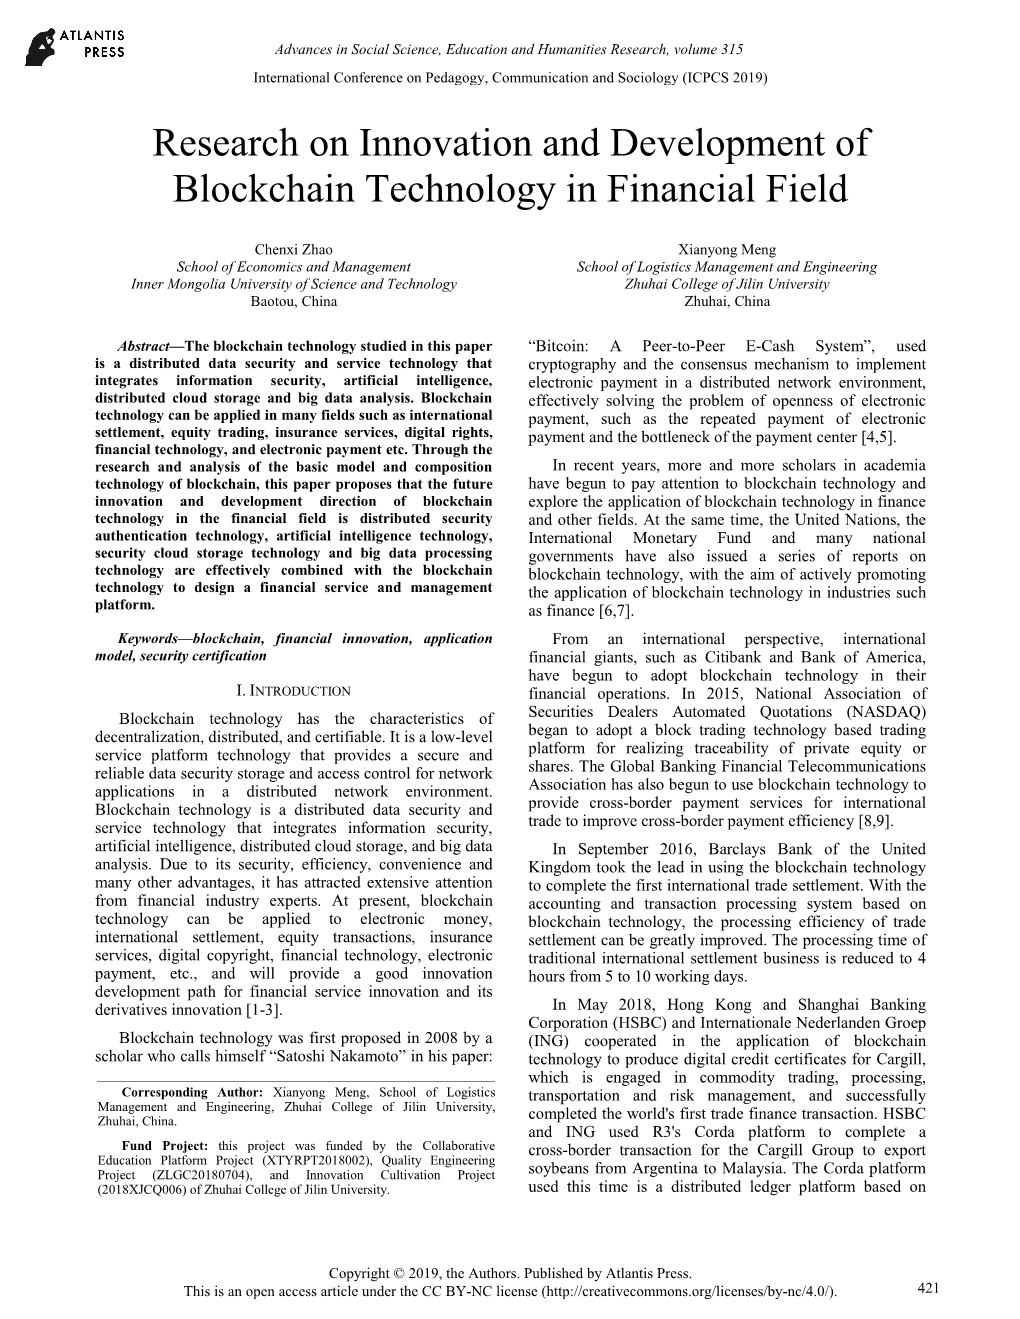 Research on Innovation and Development of Blockchain Technology in Financial Field